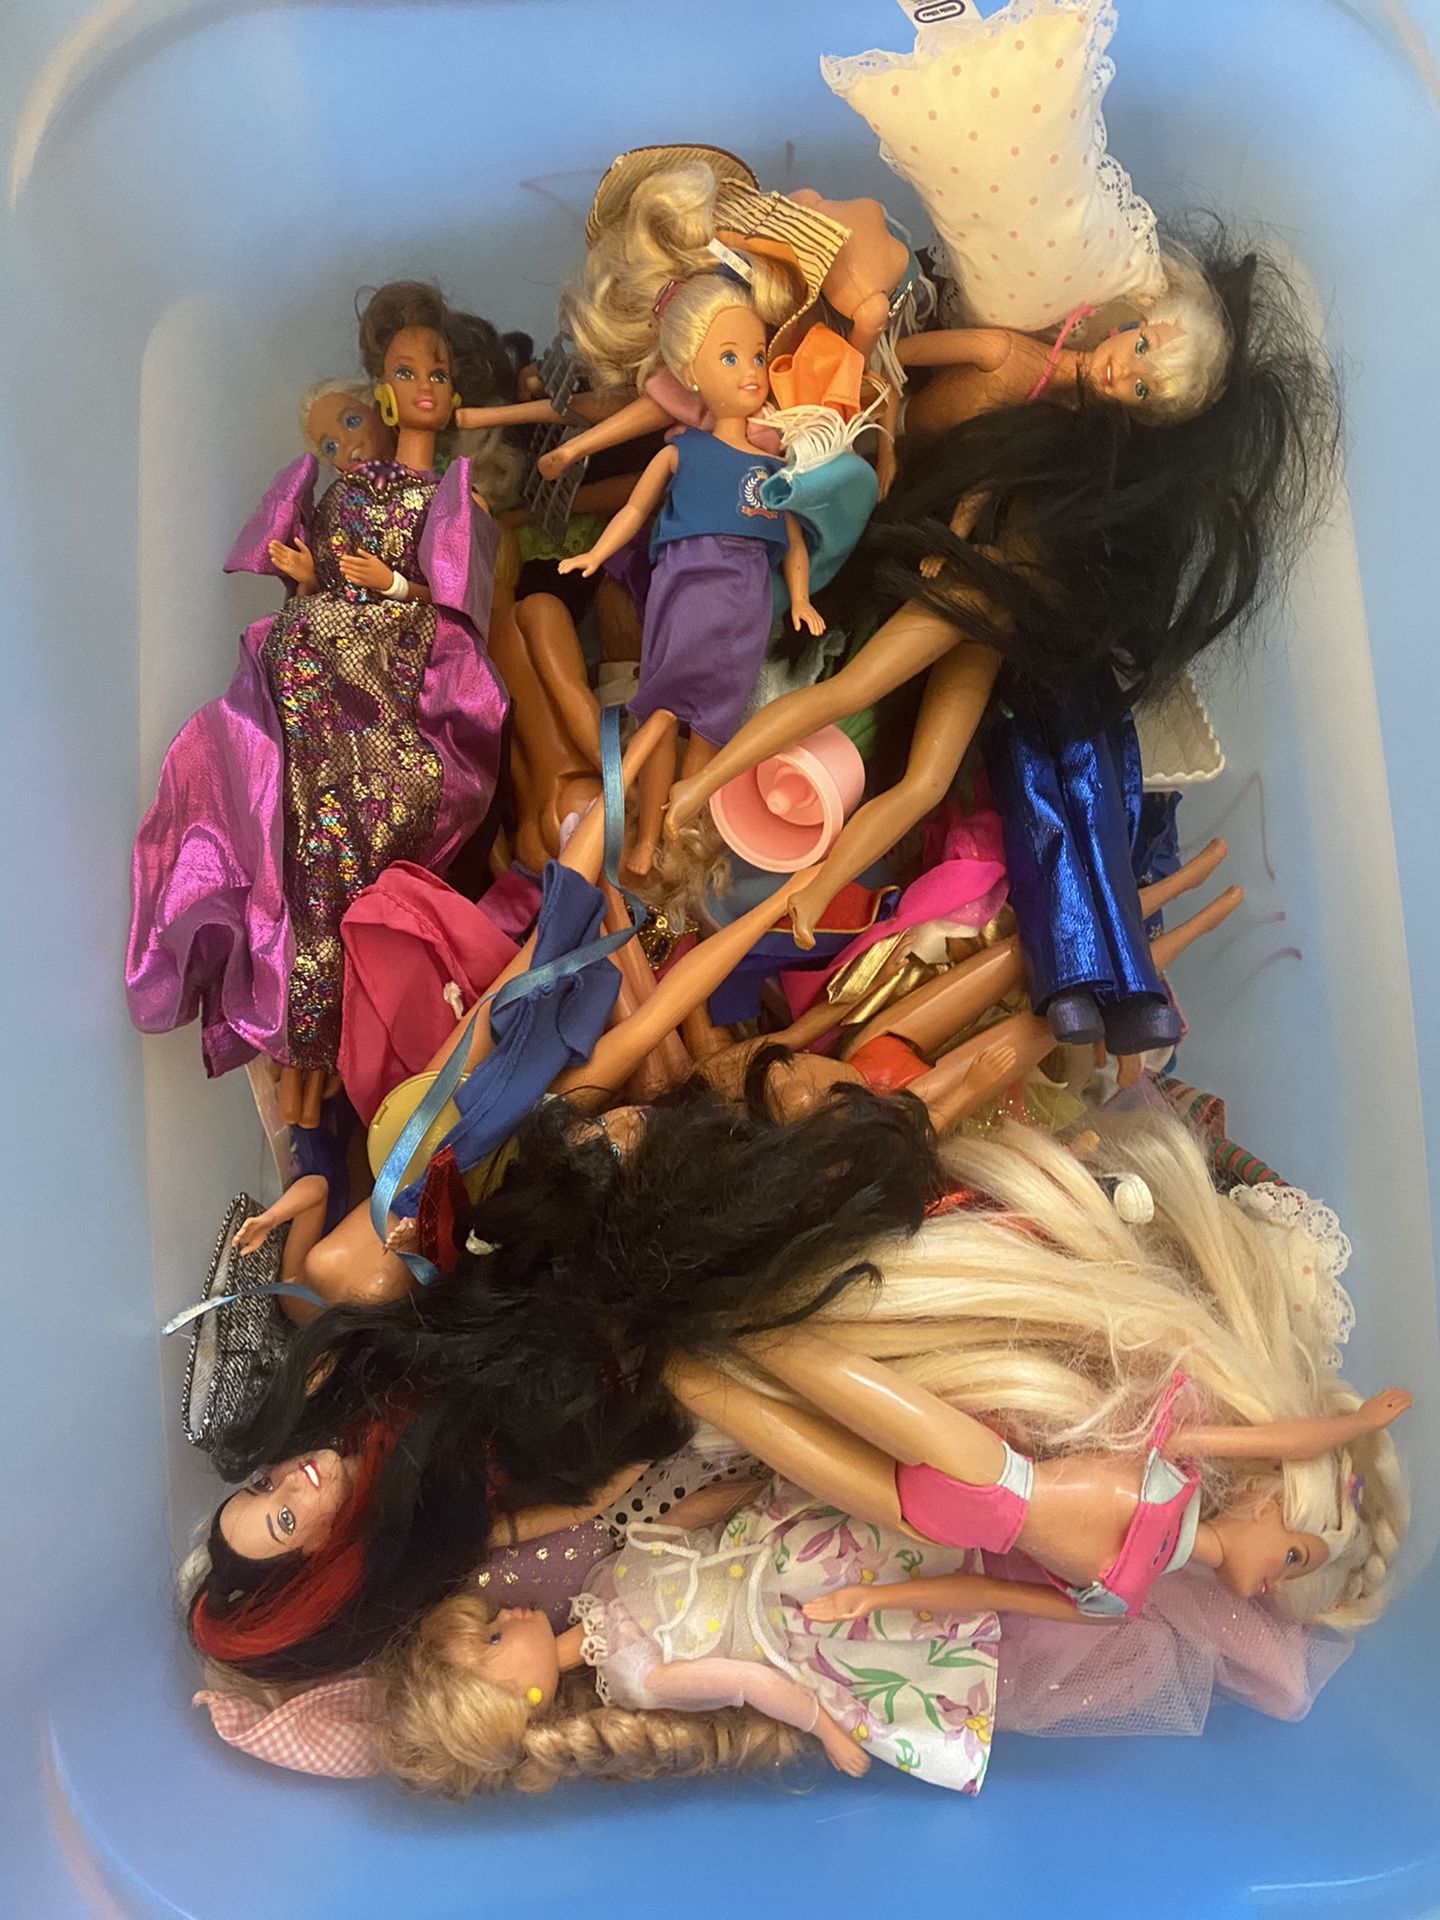 Miscellaneous barbies, Barbie clothes, and a Barbie playhouse